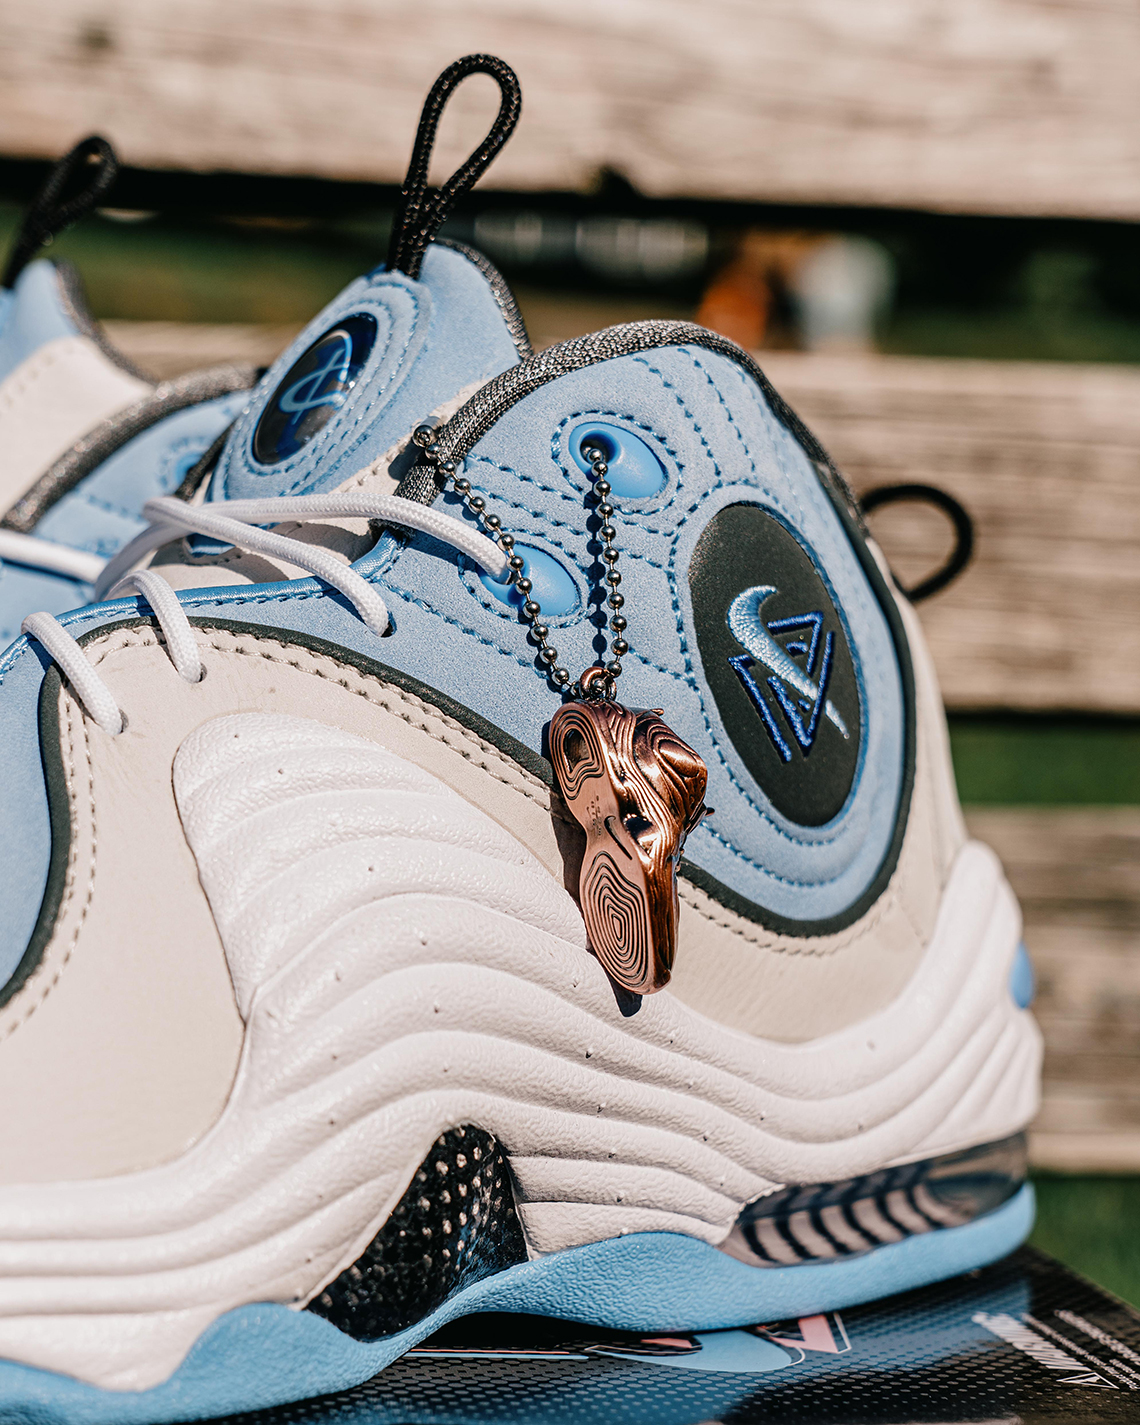 social status nike air penny 2 playground white blue release date 9